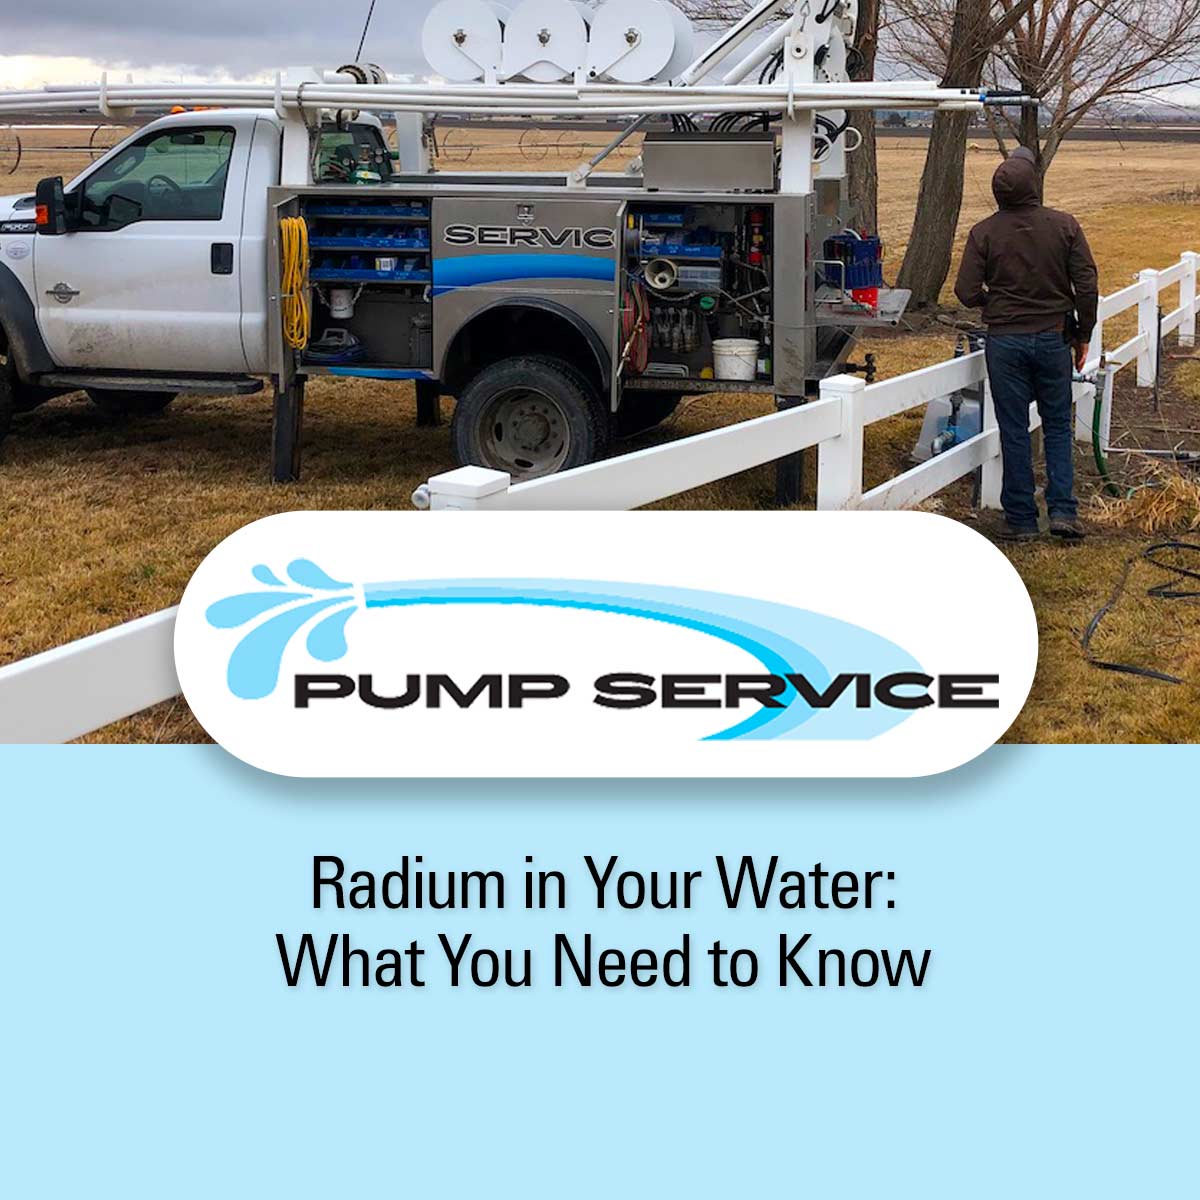 Radium in Your Water: What You Need to Know